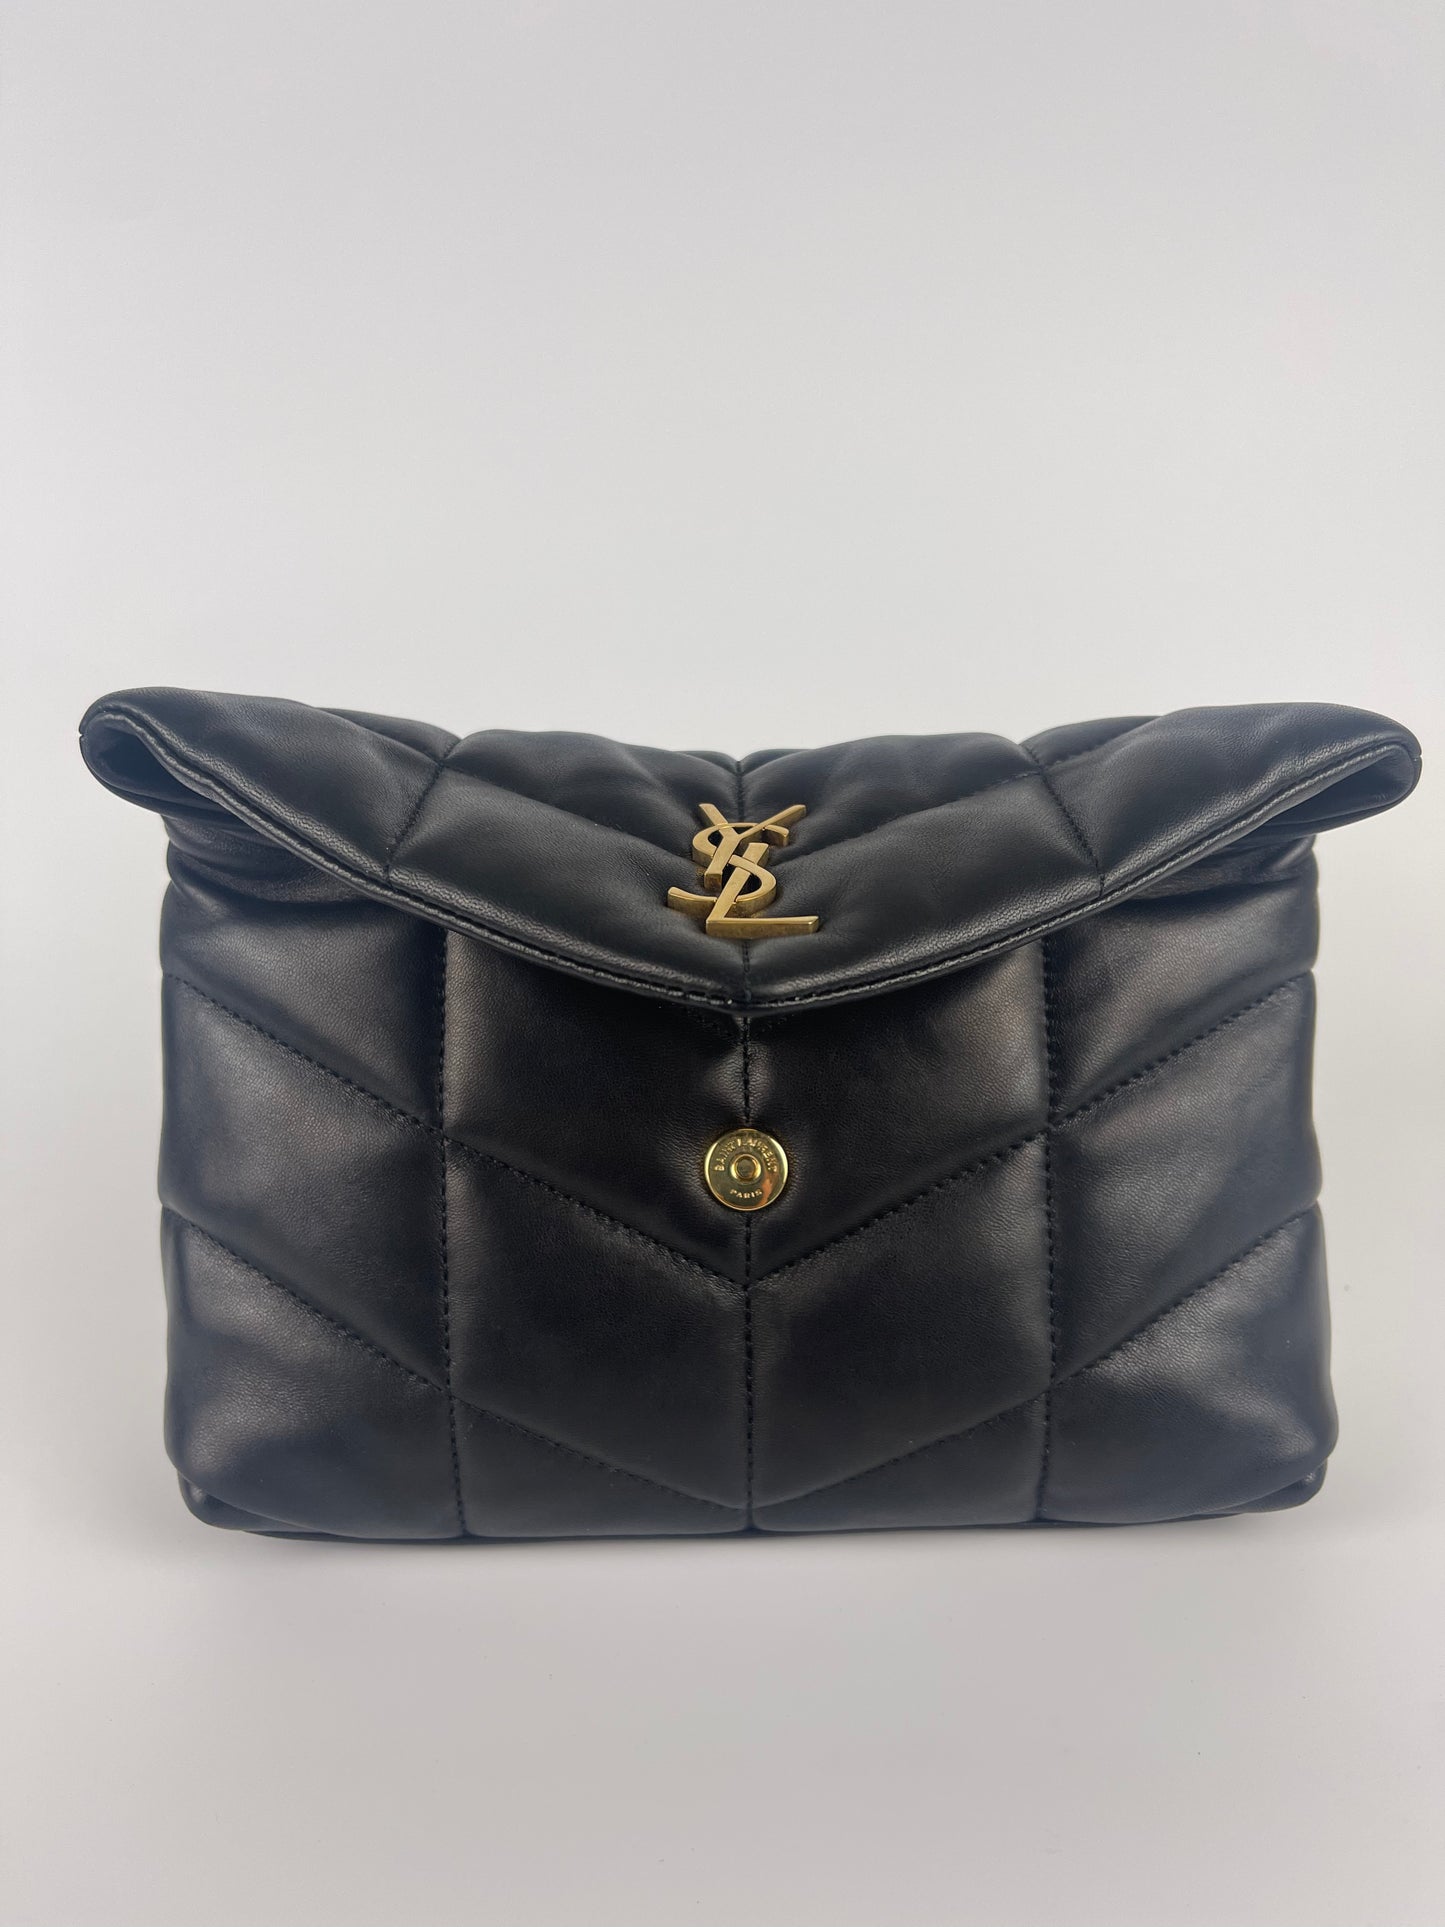 LouLou Toy YSL Puffer Quilted Lambskin Crossbody Bag